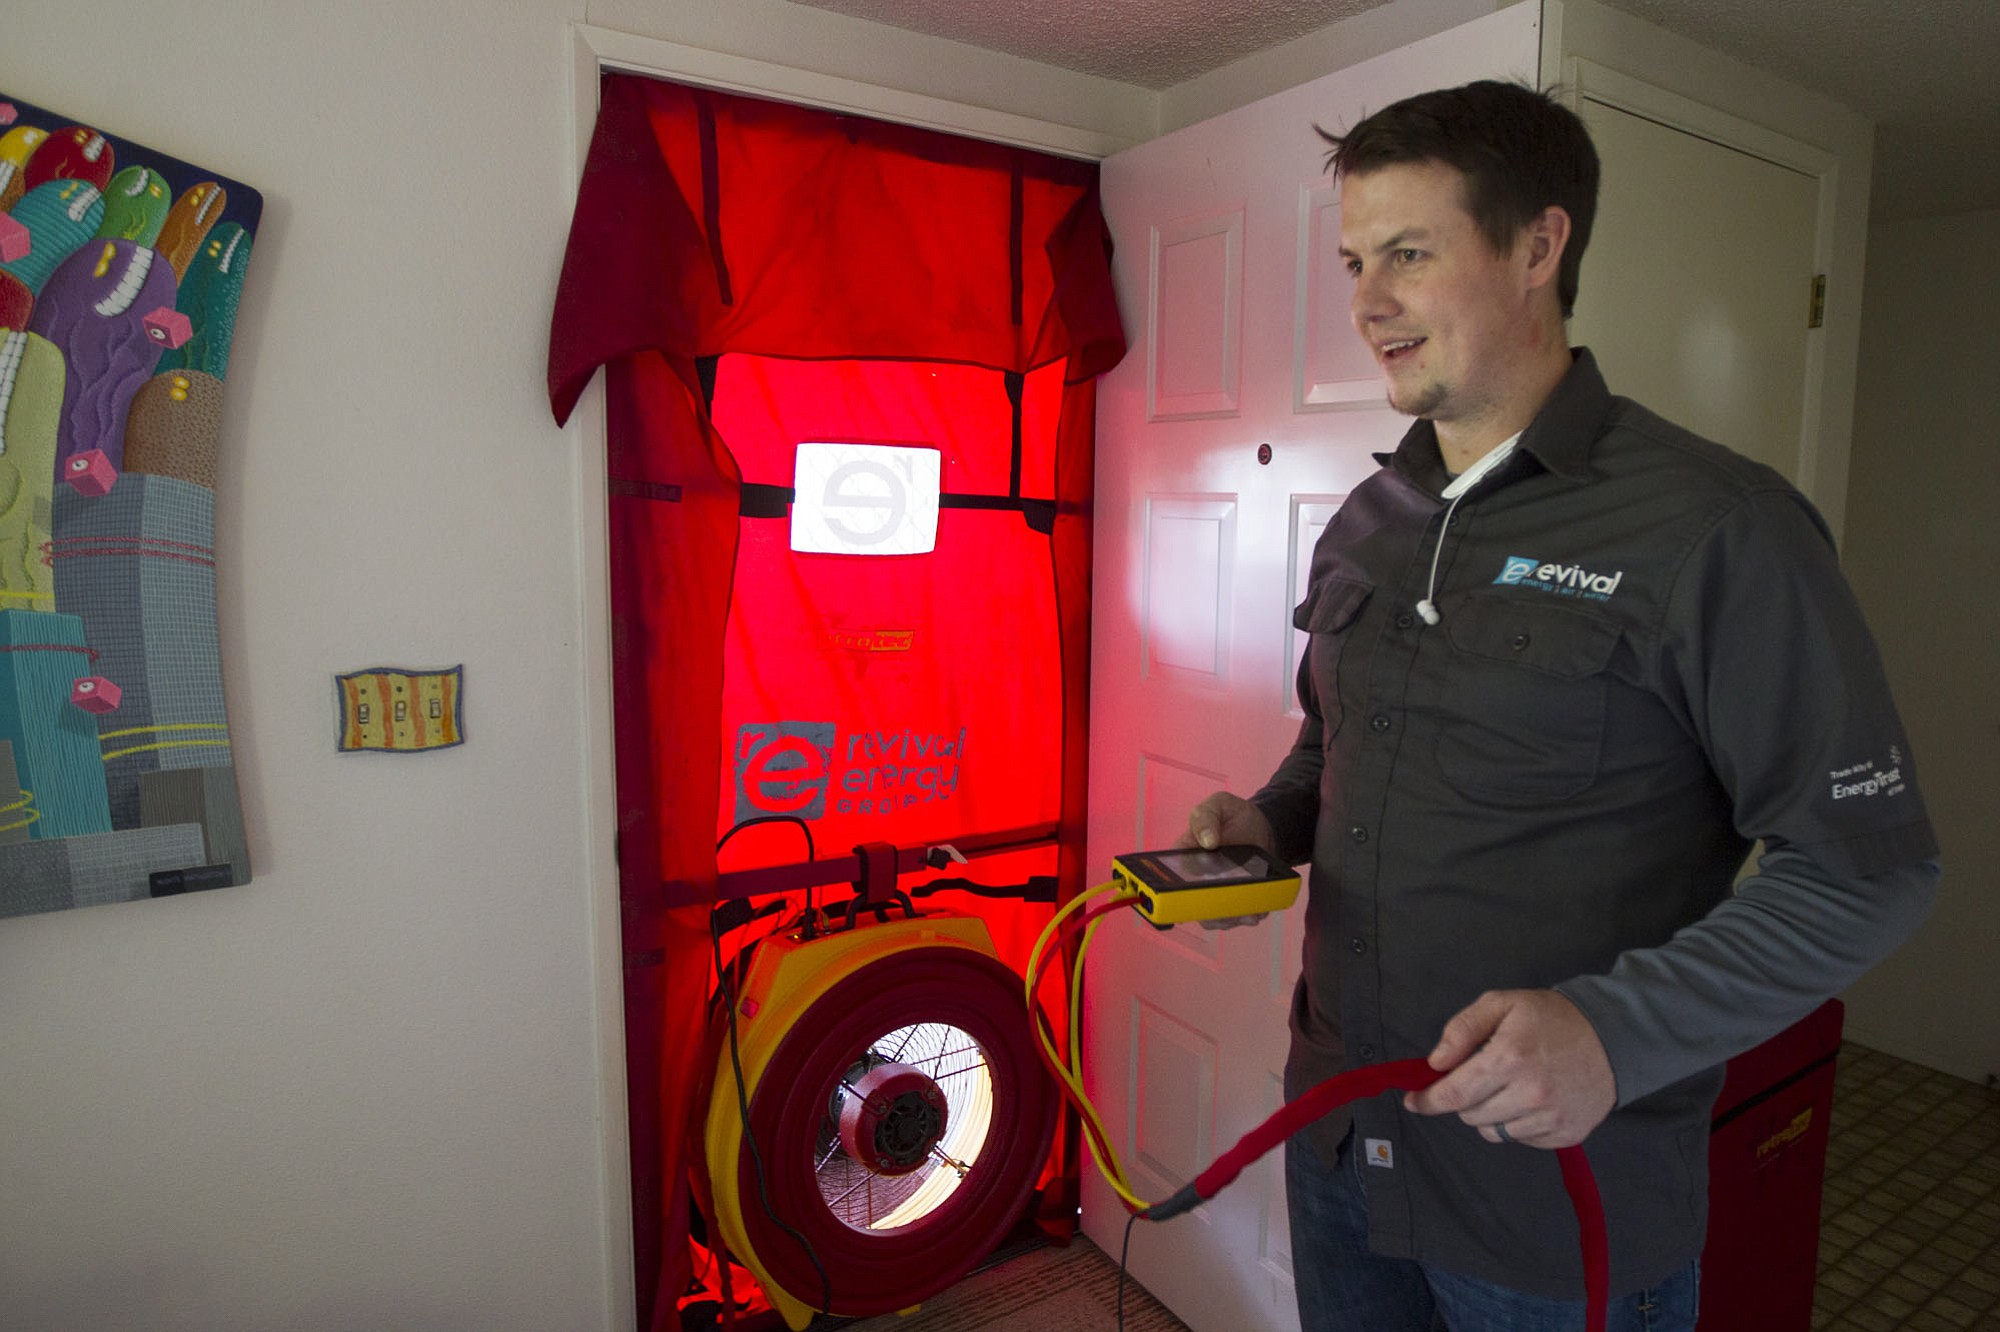 Revivial Energy Group's Robert Brierley conducts a pressure test to detect heat or cool air leaks as part of an energy audit in the Cascade Park home of Kaye and Monte Wolverton.